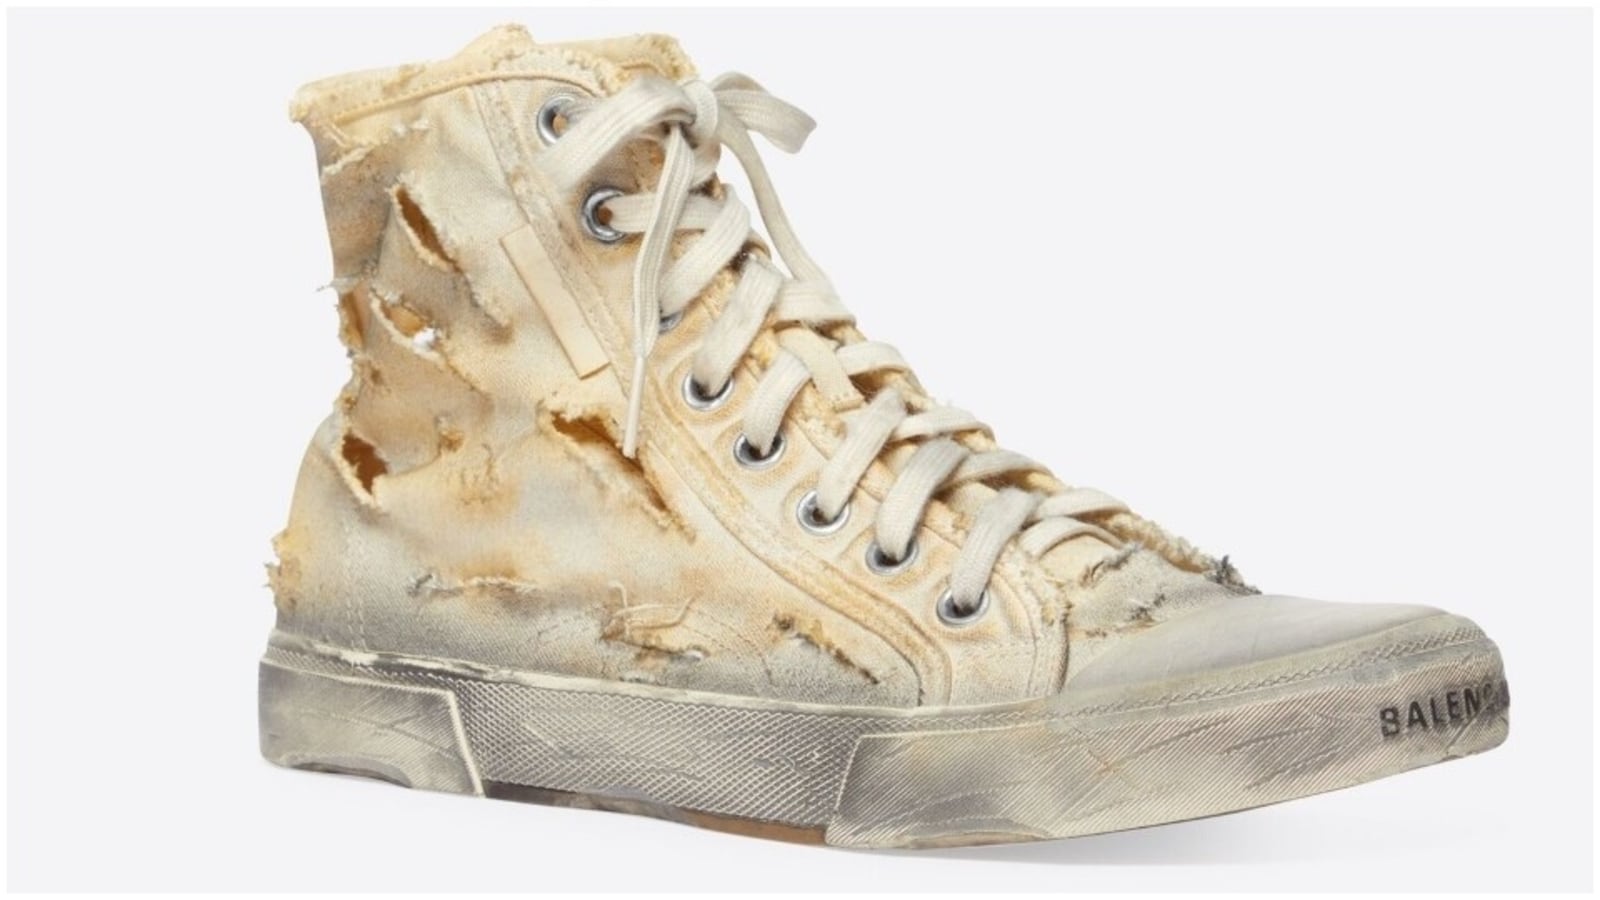 BALENCIAGA Paris Distressed LogoEmbroidered Canvas HighTop Sneakers for  Men  MR PORTER